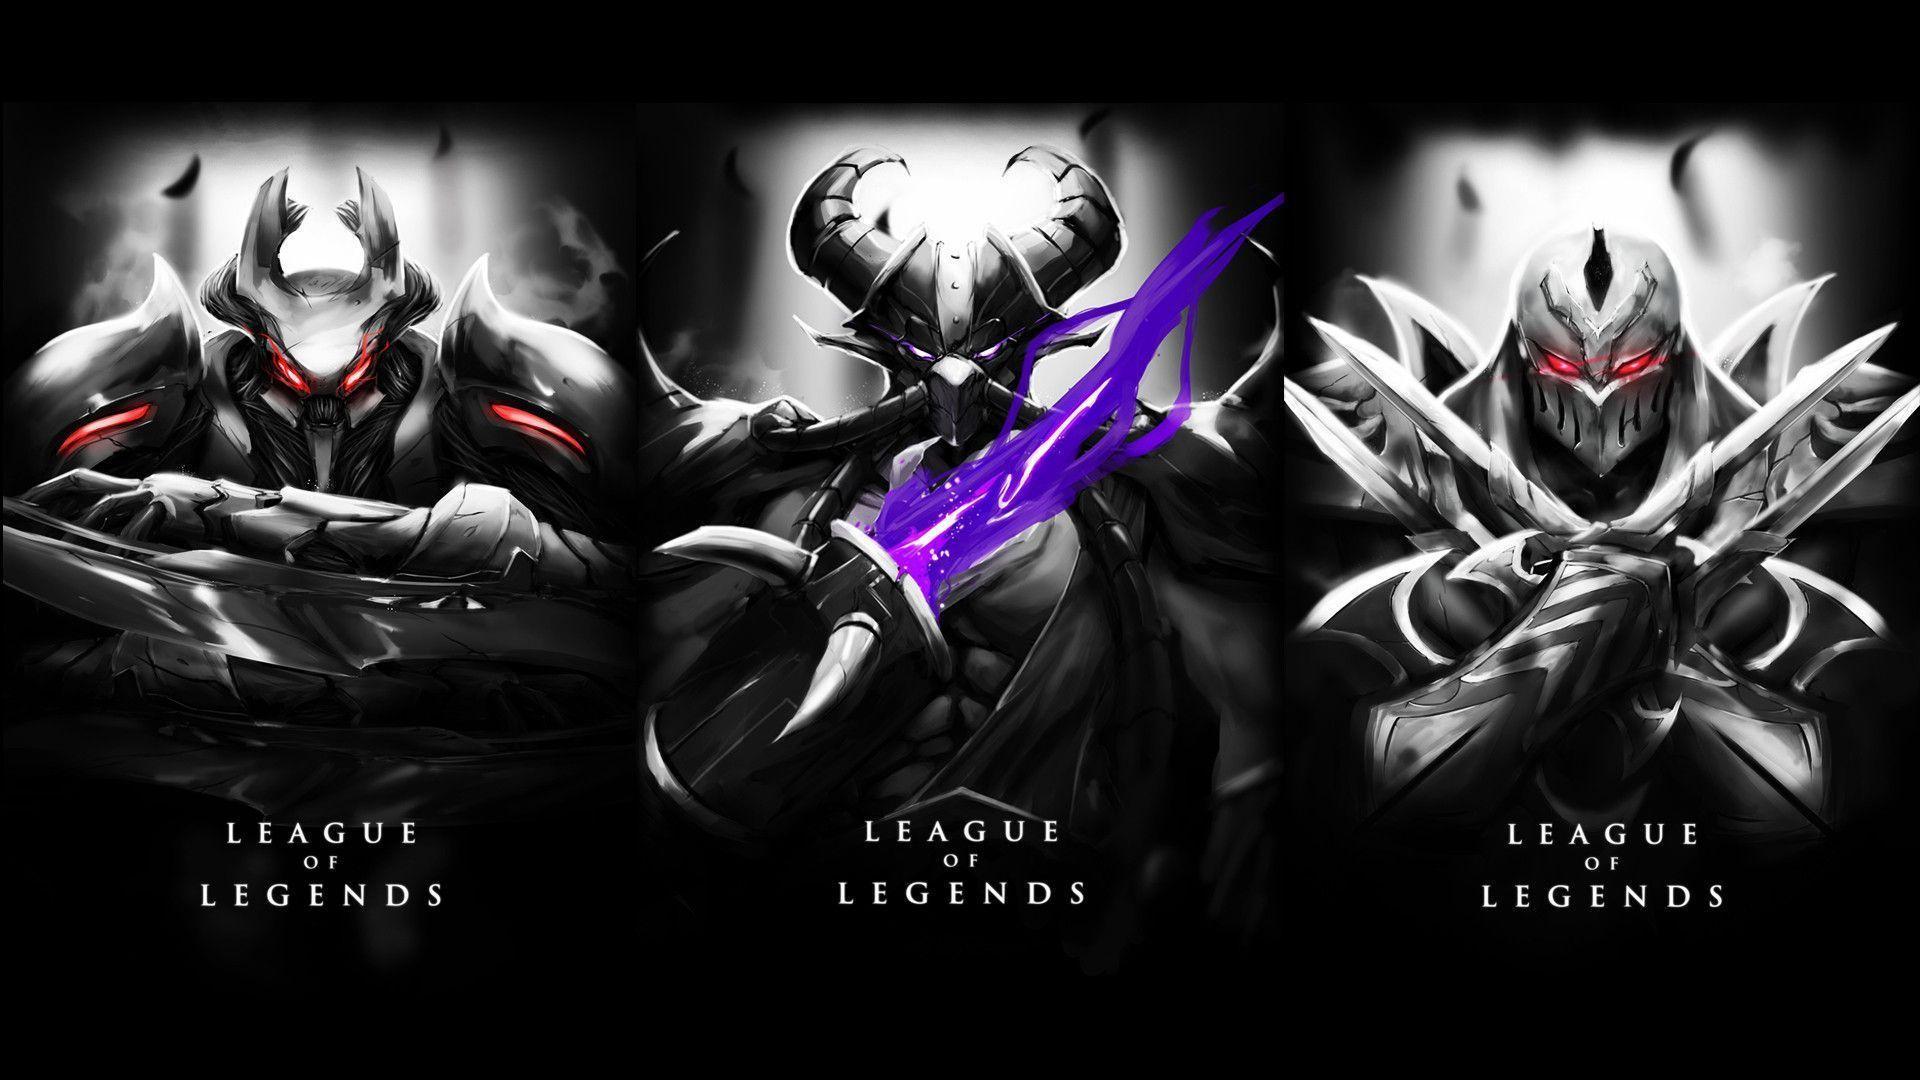 League of Legends (mostly) HD Wallpaper album! (over 300